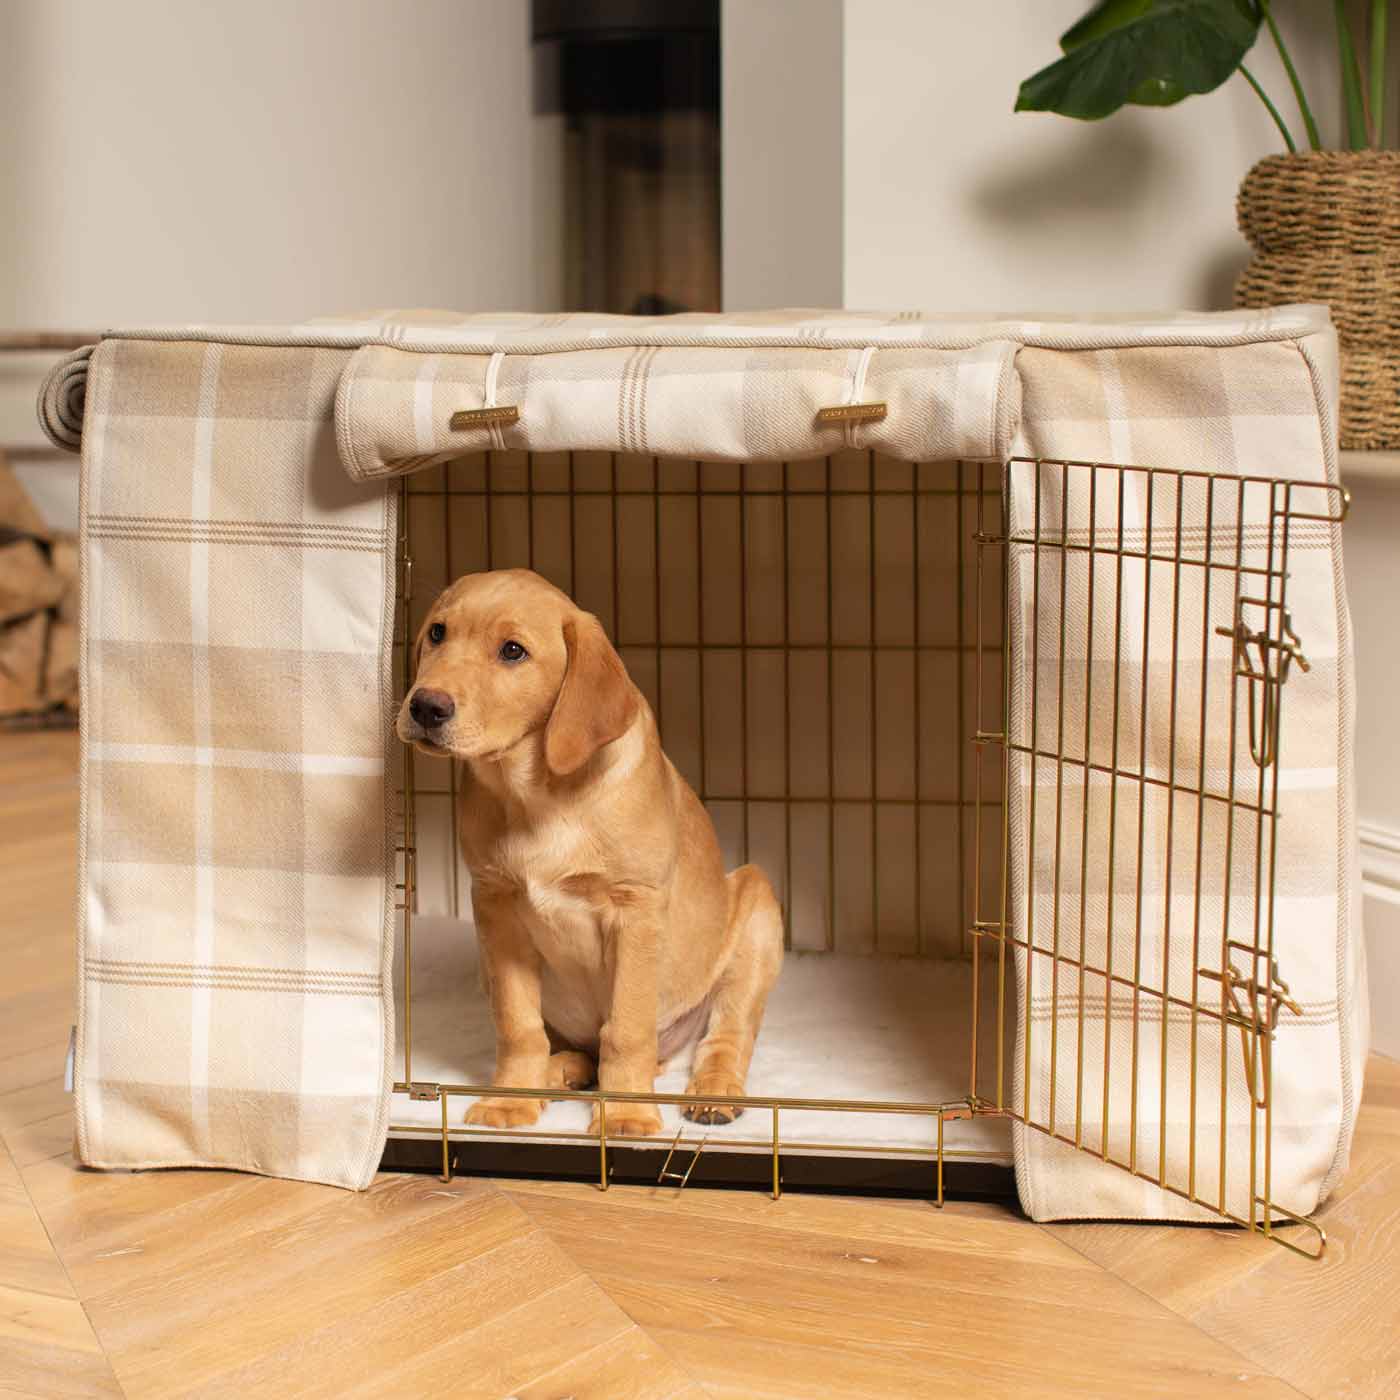 Luxury Gold Dog Cage Set With Bumper, The Perfect Dog Crate For The Ultimate Naptime, Available Now at Lords & Labradors US